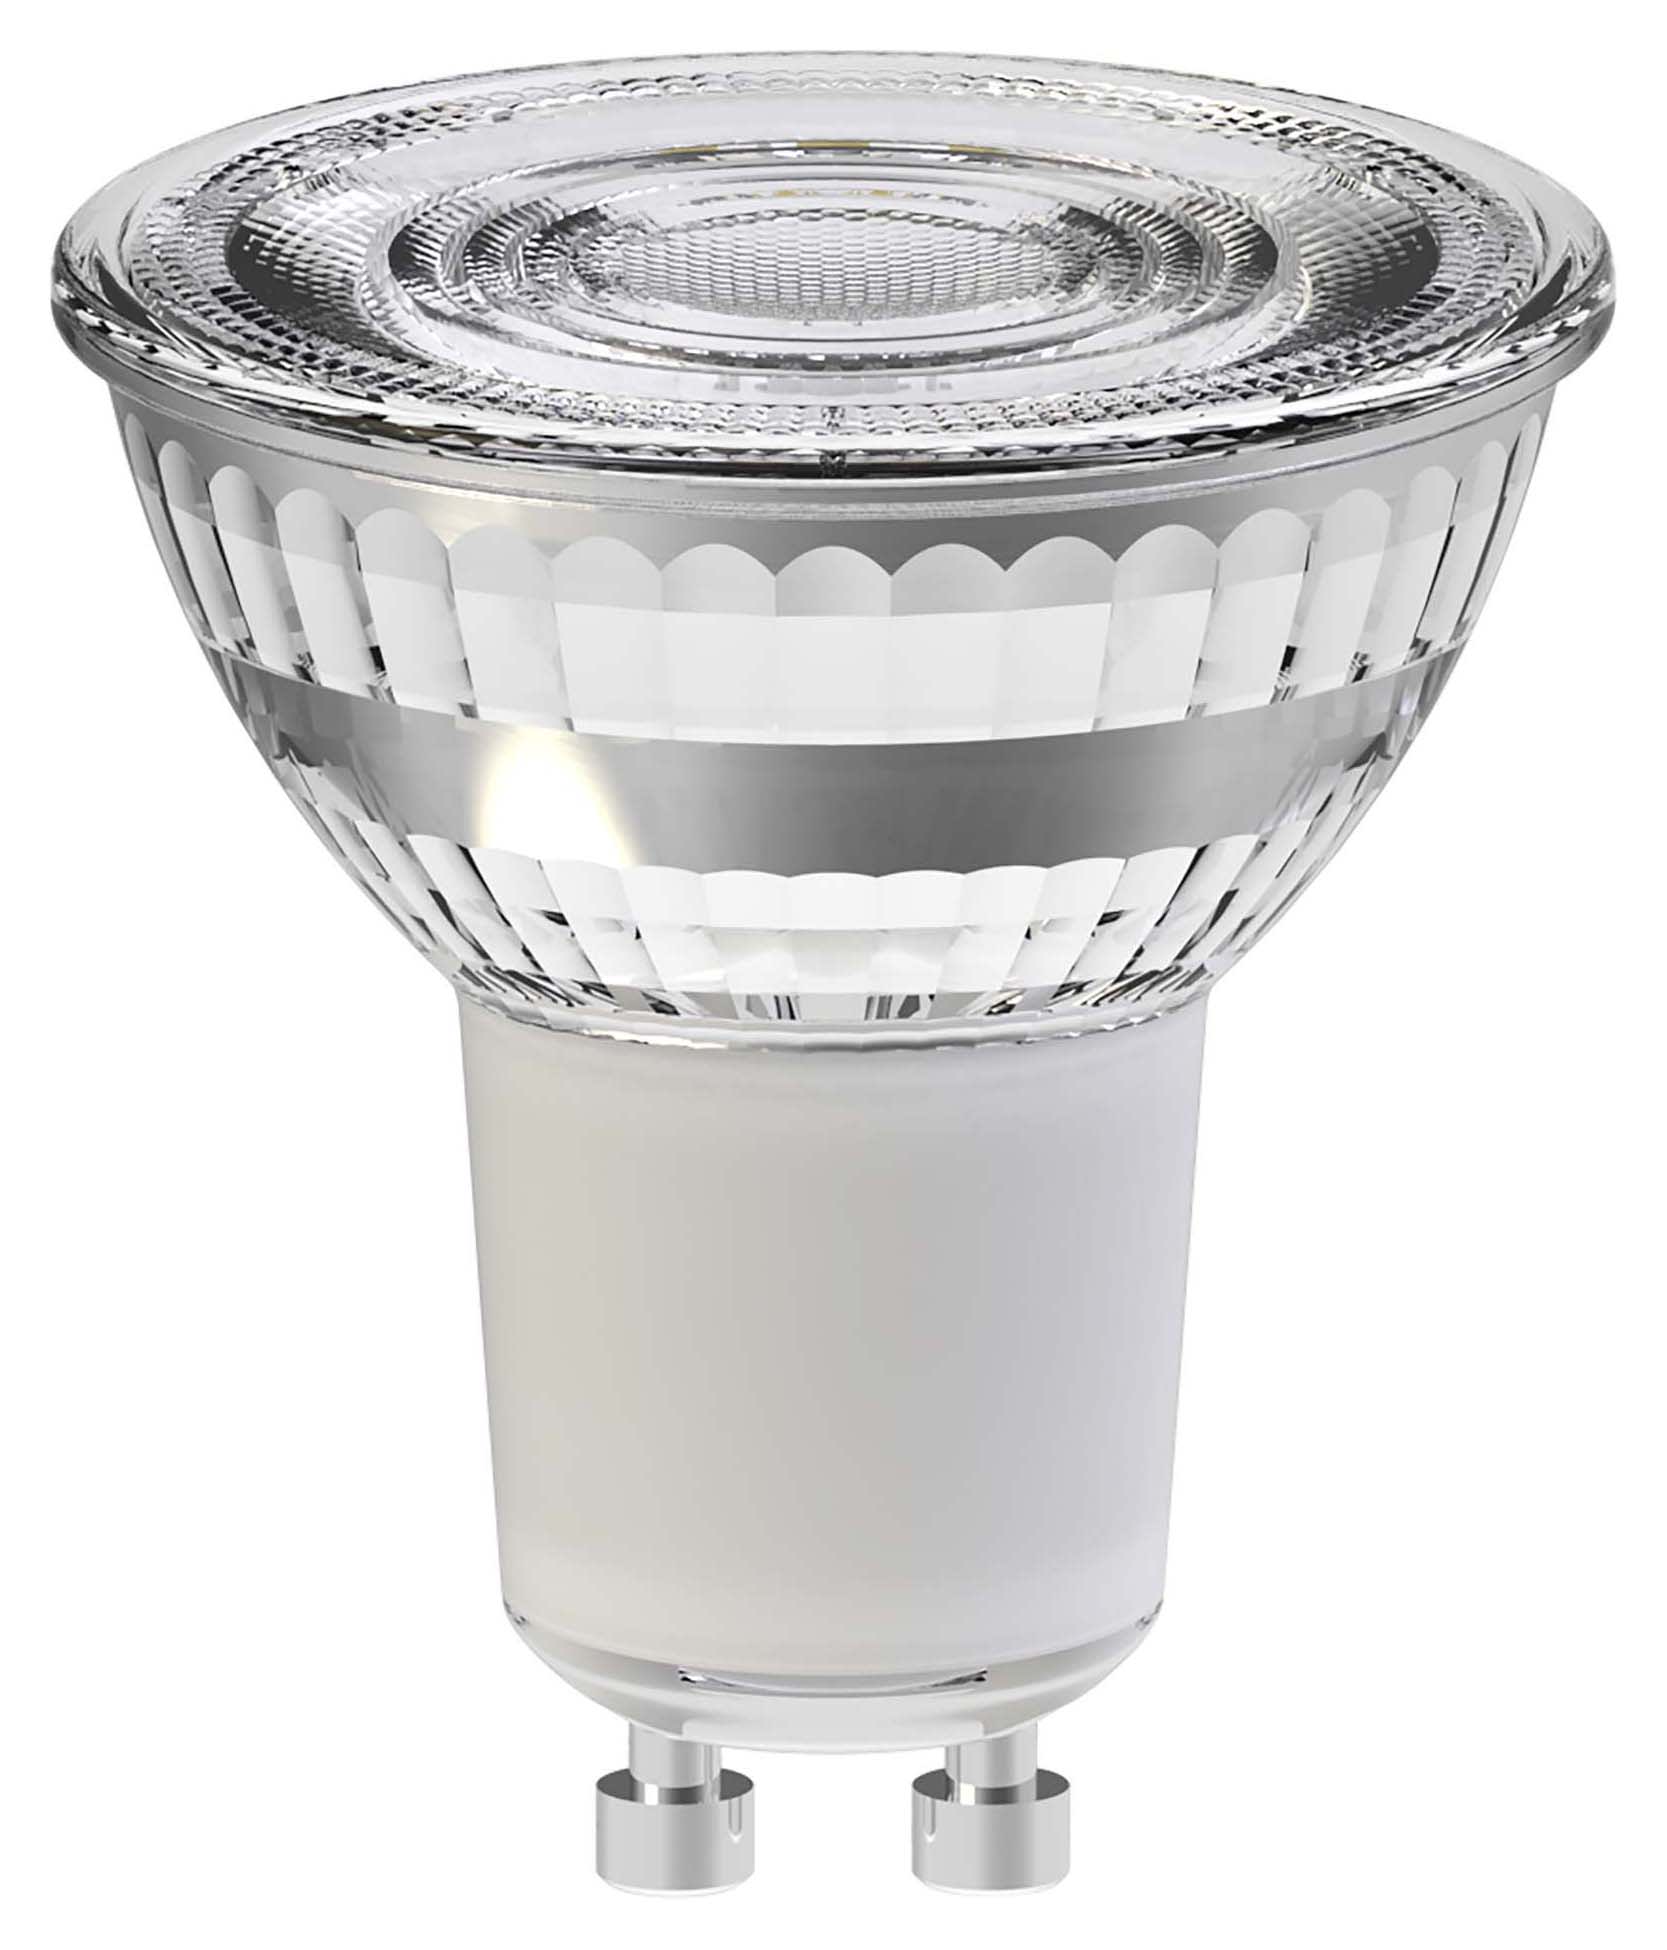 Wickes Dimmable LED GU10 4.2W Cool White Light